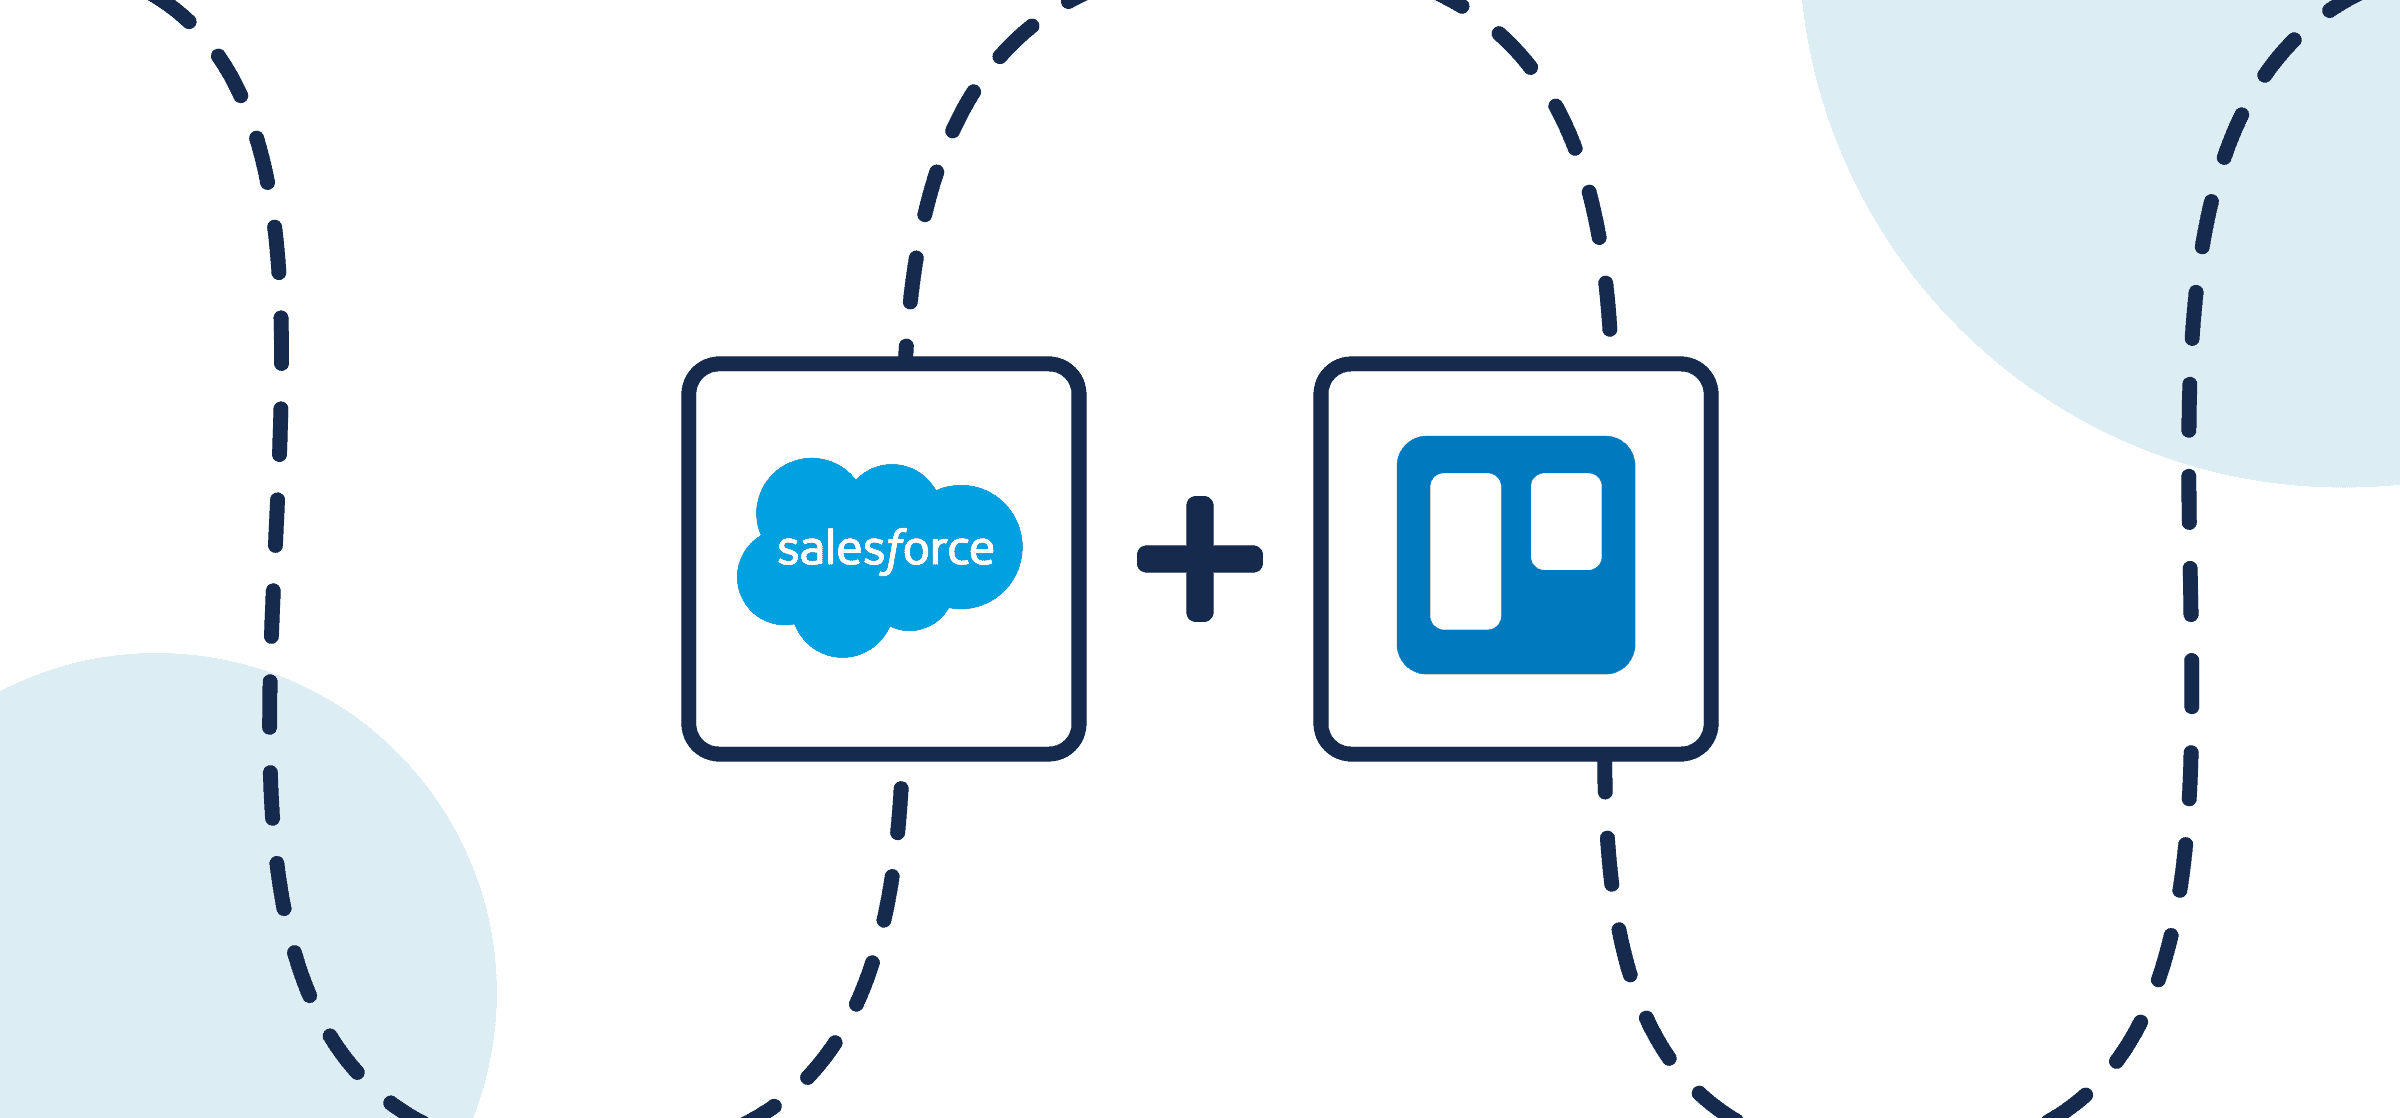 Featured image displaying the logos of Salesforce and Trello in Unito's guide to setting up a simple Two-Way Sync